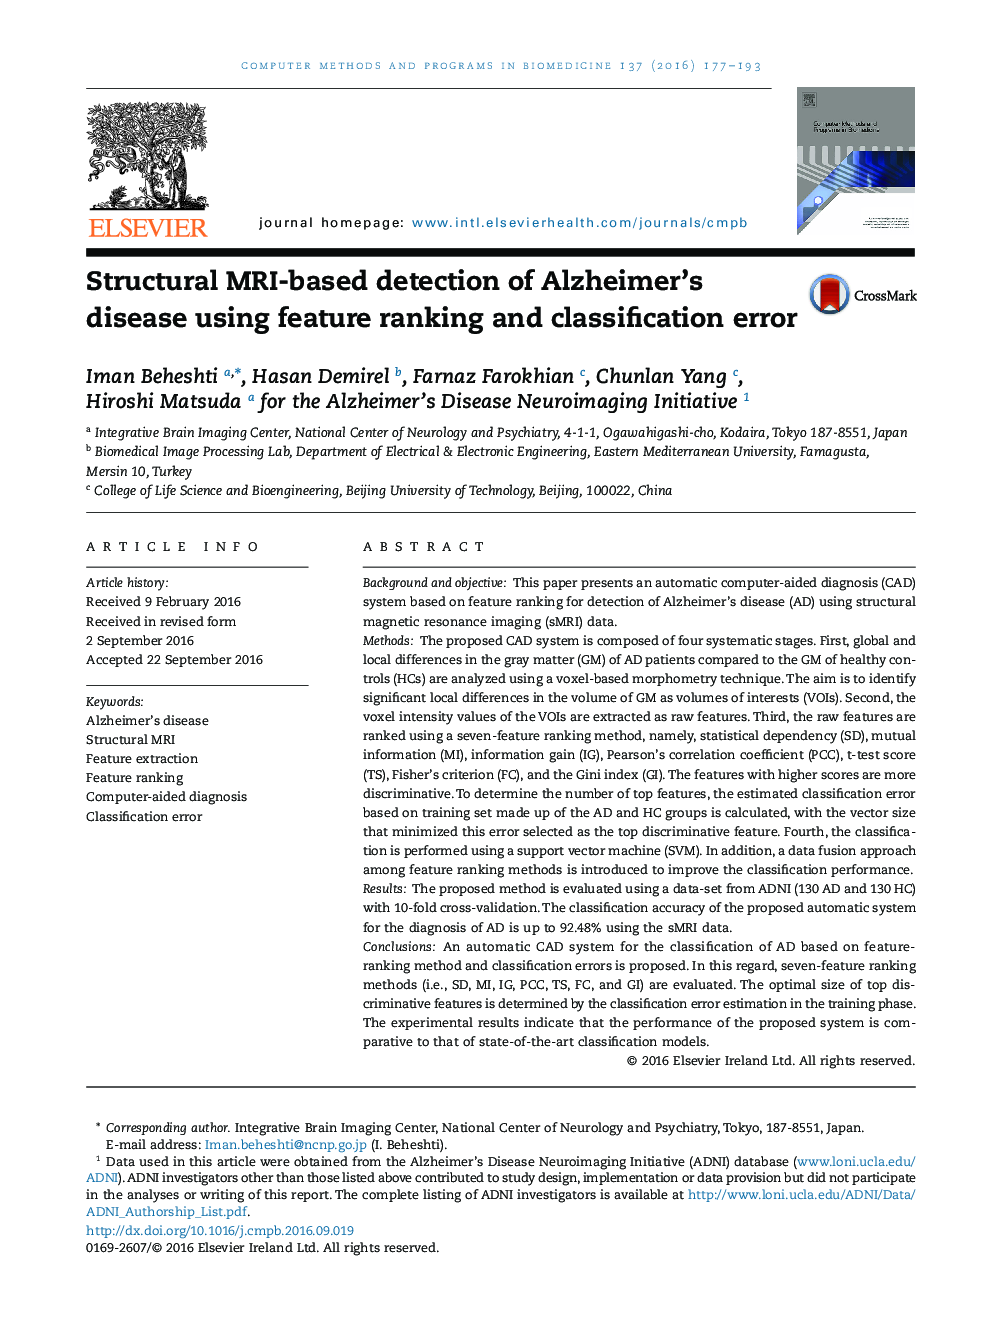 Structural MRI-based detection of Alzheimer's disease using feature ranking and classification error